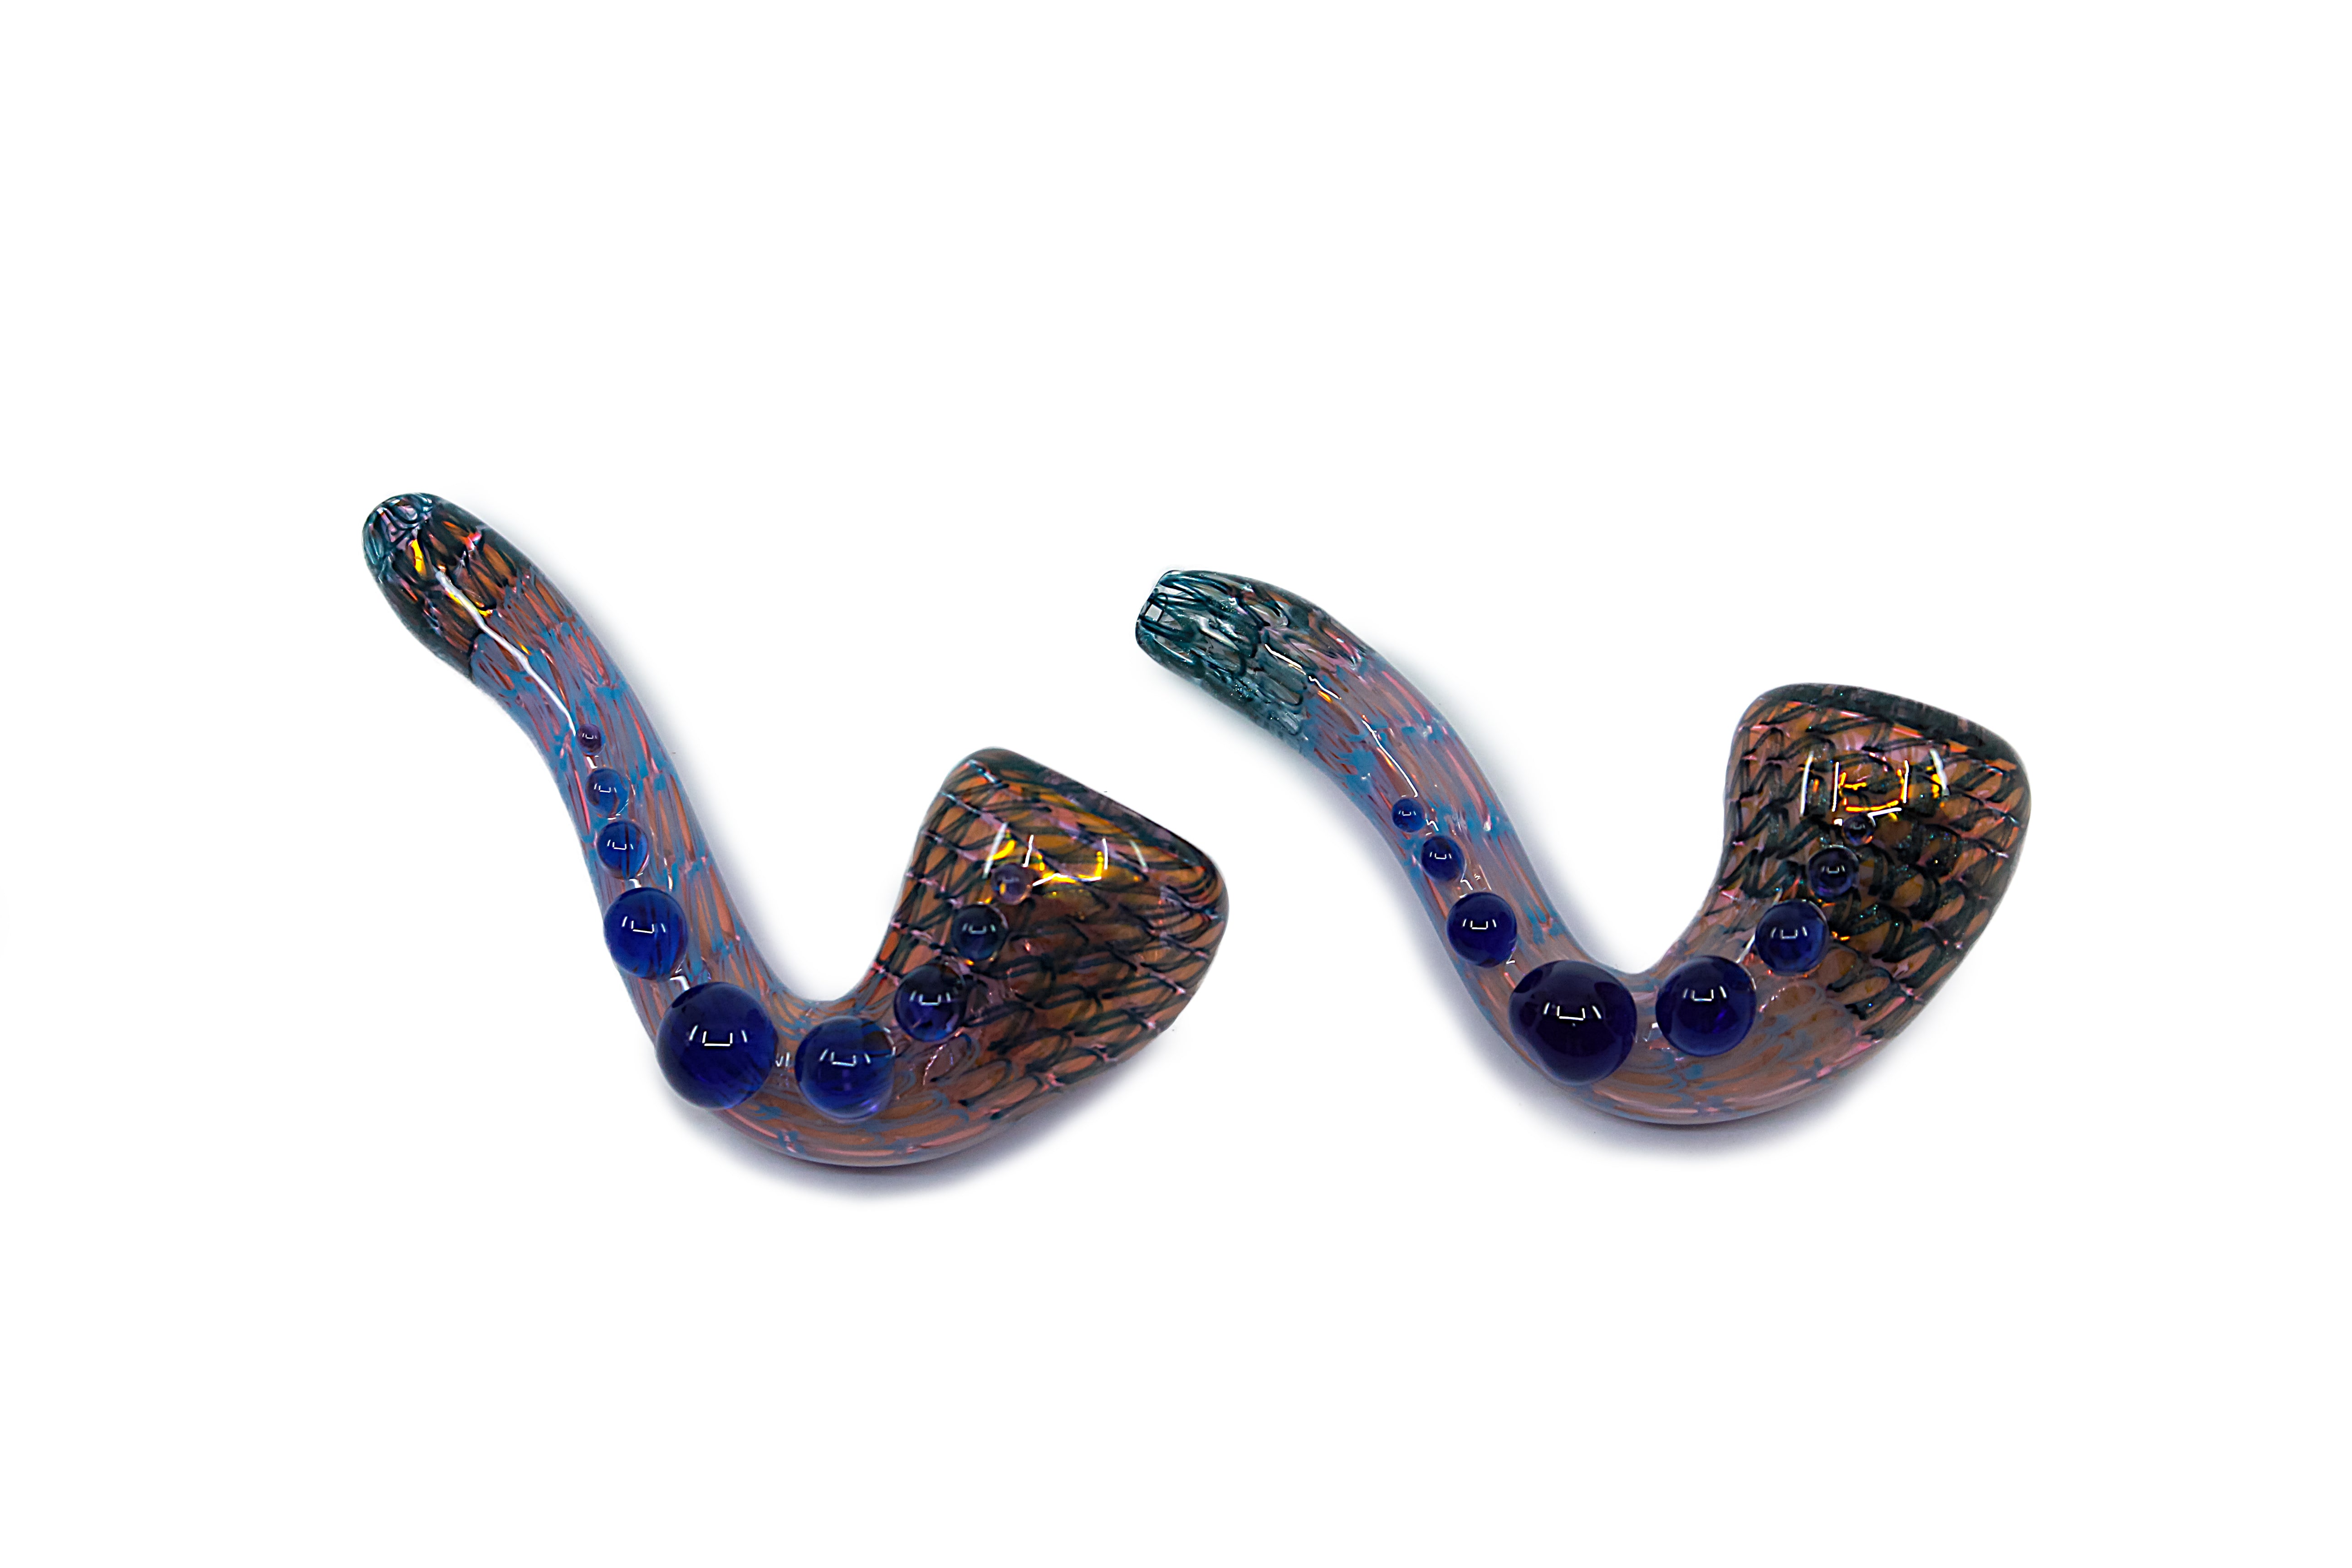 Large Coil Sherlock Pipe - Made in U.S.A. PPPI 